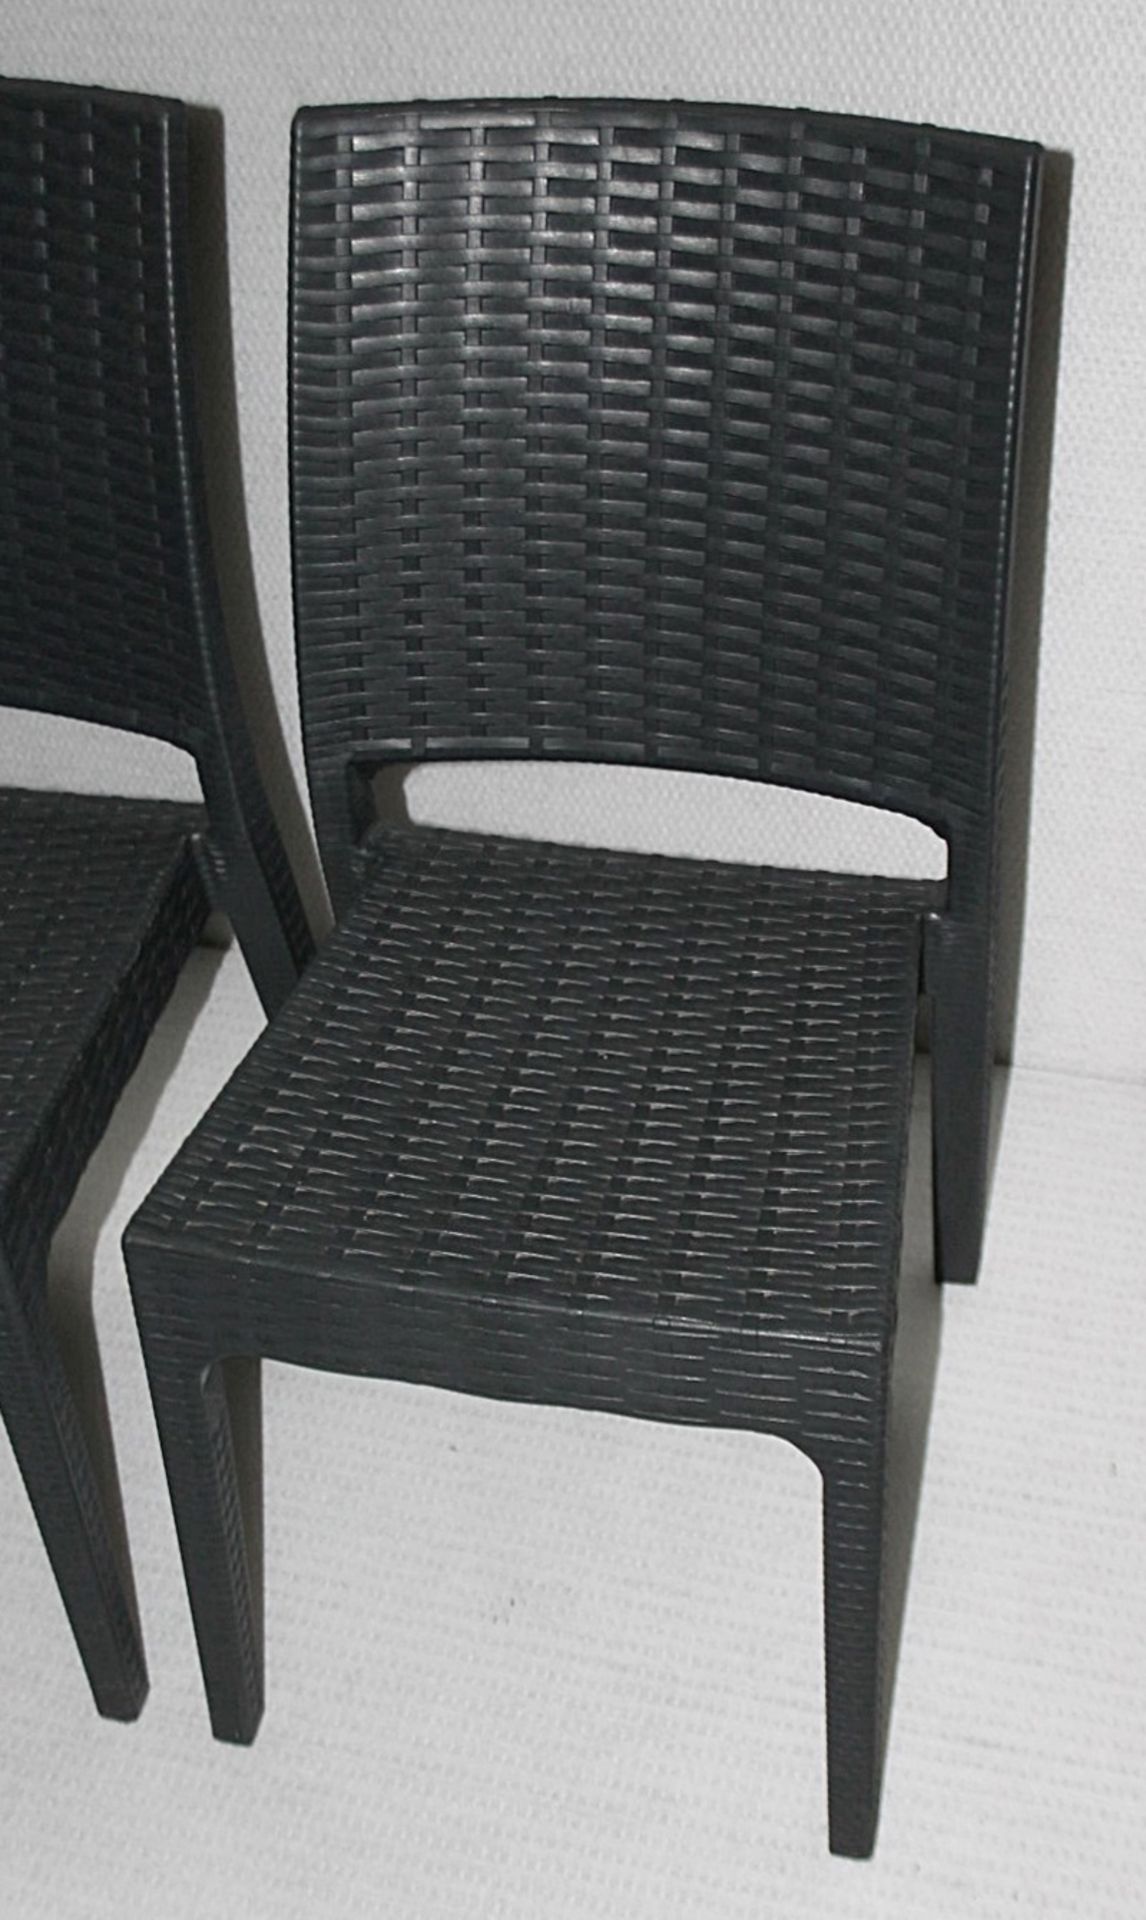 4 x SIESTA EXCLUSIVE 'Florida' Commercial Stackable Rattan-style Chairs In Dark Grey - RRP £320.00 - Image 2 of 13